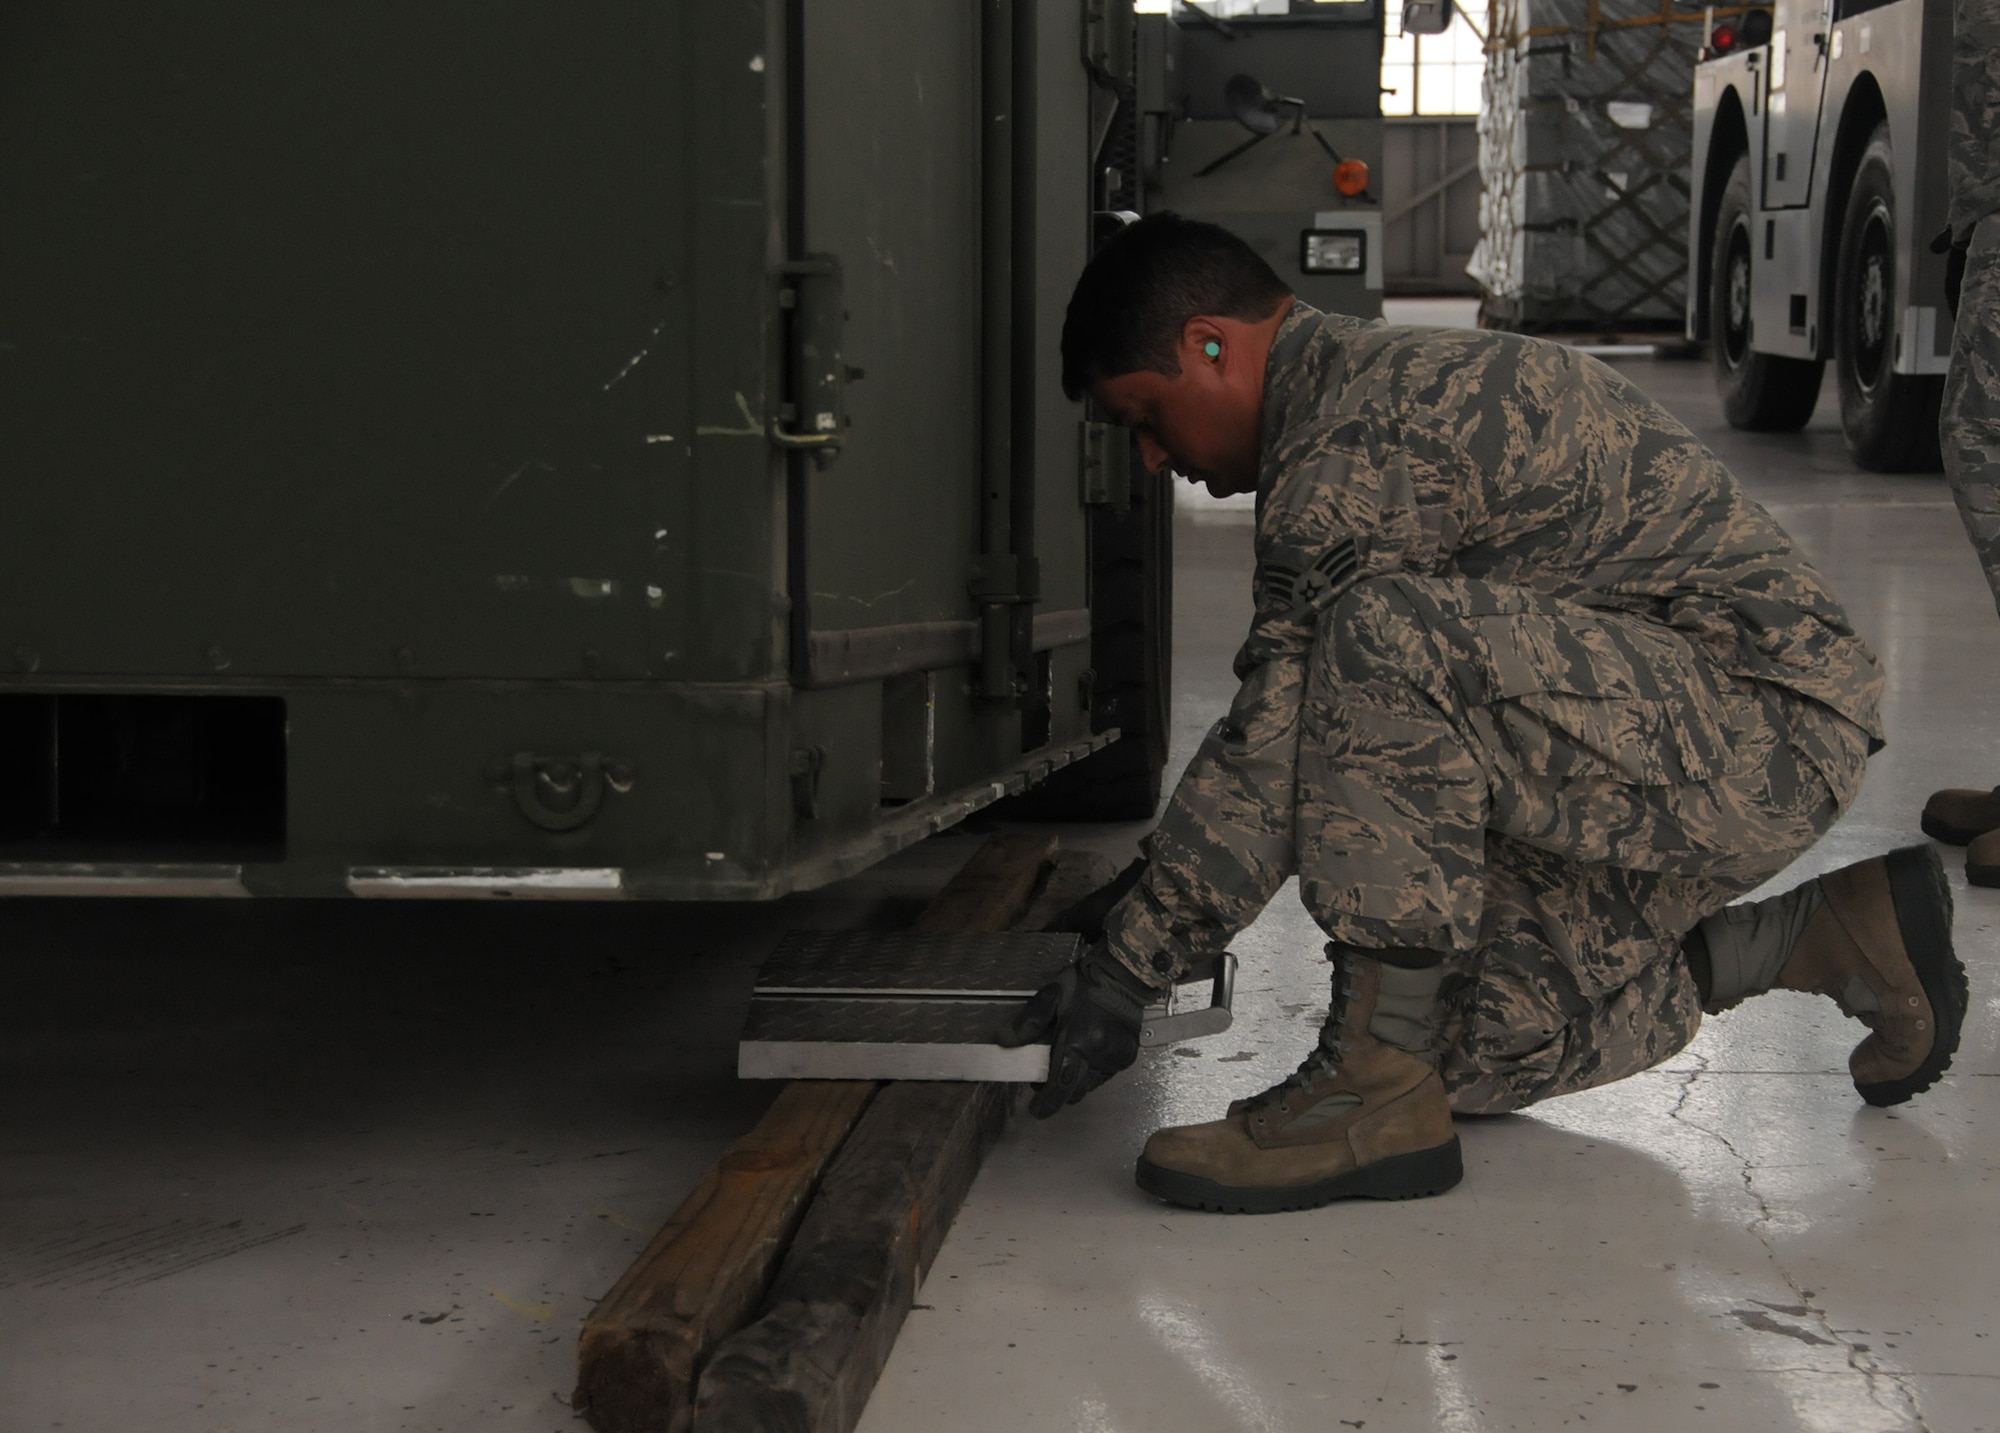 WRIGHT-PATTERSON AIR FORCE BASE, Ohio – Senior Airman Abraham Cancel, 87th Aerial Port Squadron, places a scale under a cargo shipping container during cargo building training during the July 19, 2014 unit training assembly. (U.S. Air Force photo/Tech. Sgt. Anthony G. Springer)